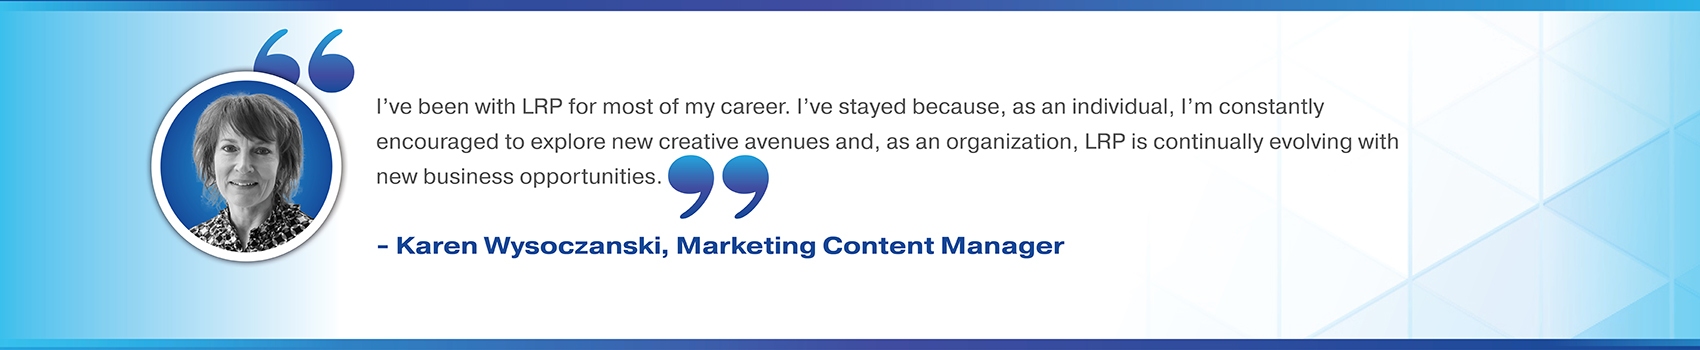 I've been with LRP for most of my career. I've stayed because, as an individual, I'm constantly encouraged to explore new creative avenues and, as an organization, LRP is continually evolving with new business opportunities. Karen Wysoczanski. Marketing Content Manager